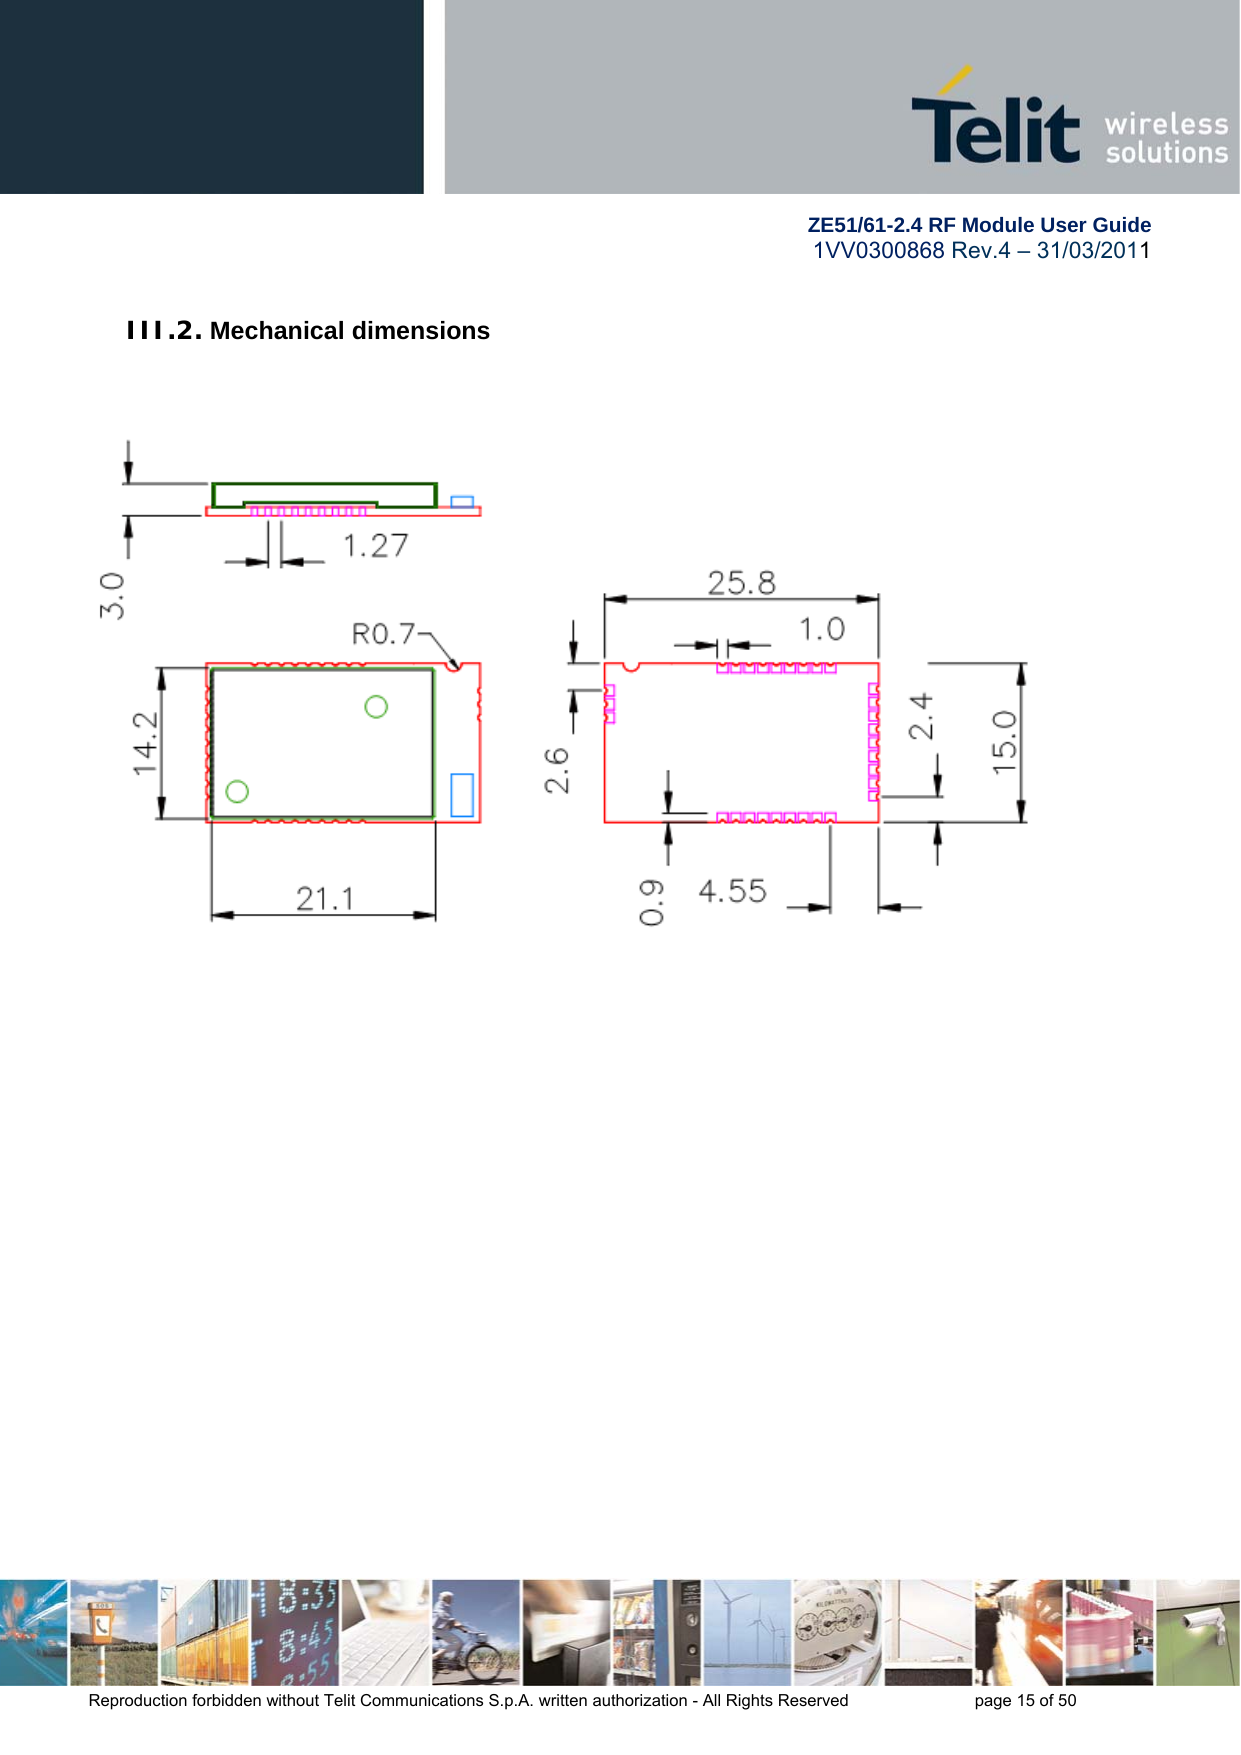        ZE51/61-2.4 RF Module User Guide 1VV0300868 Rev.4 – 31/03/2011 Reproduction forbidden without Telit Communications S.p.A. written authorization - All Rights Reserved    page 15 of 50  III.2. Mechanical dimensions    